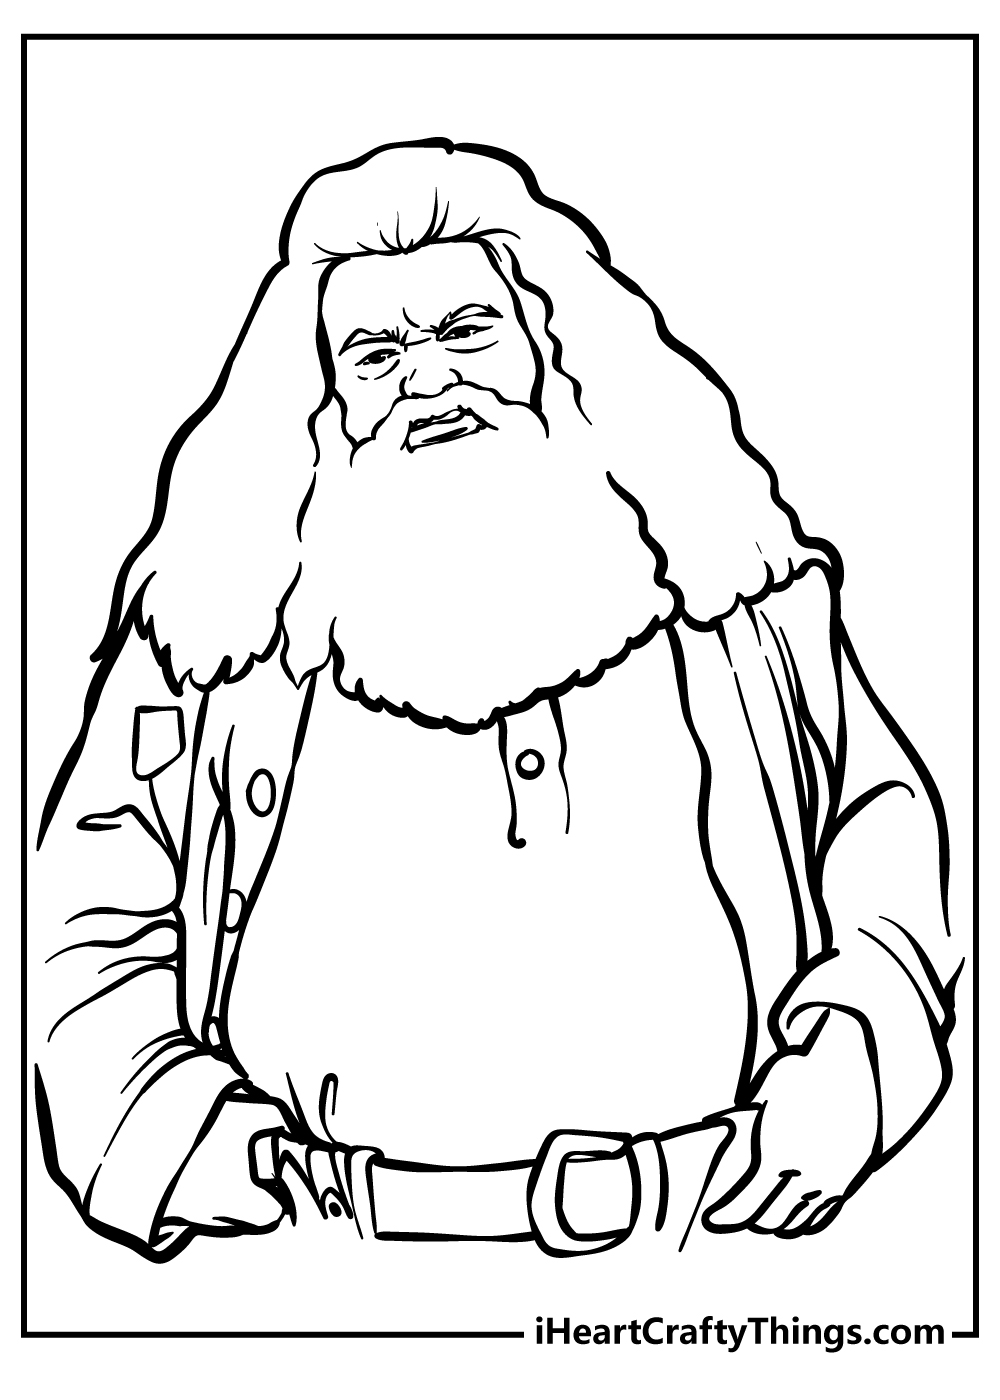 Harry Potter Coloring Pages for kids free download